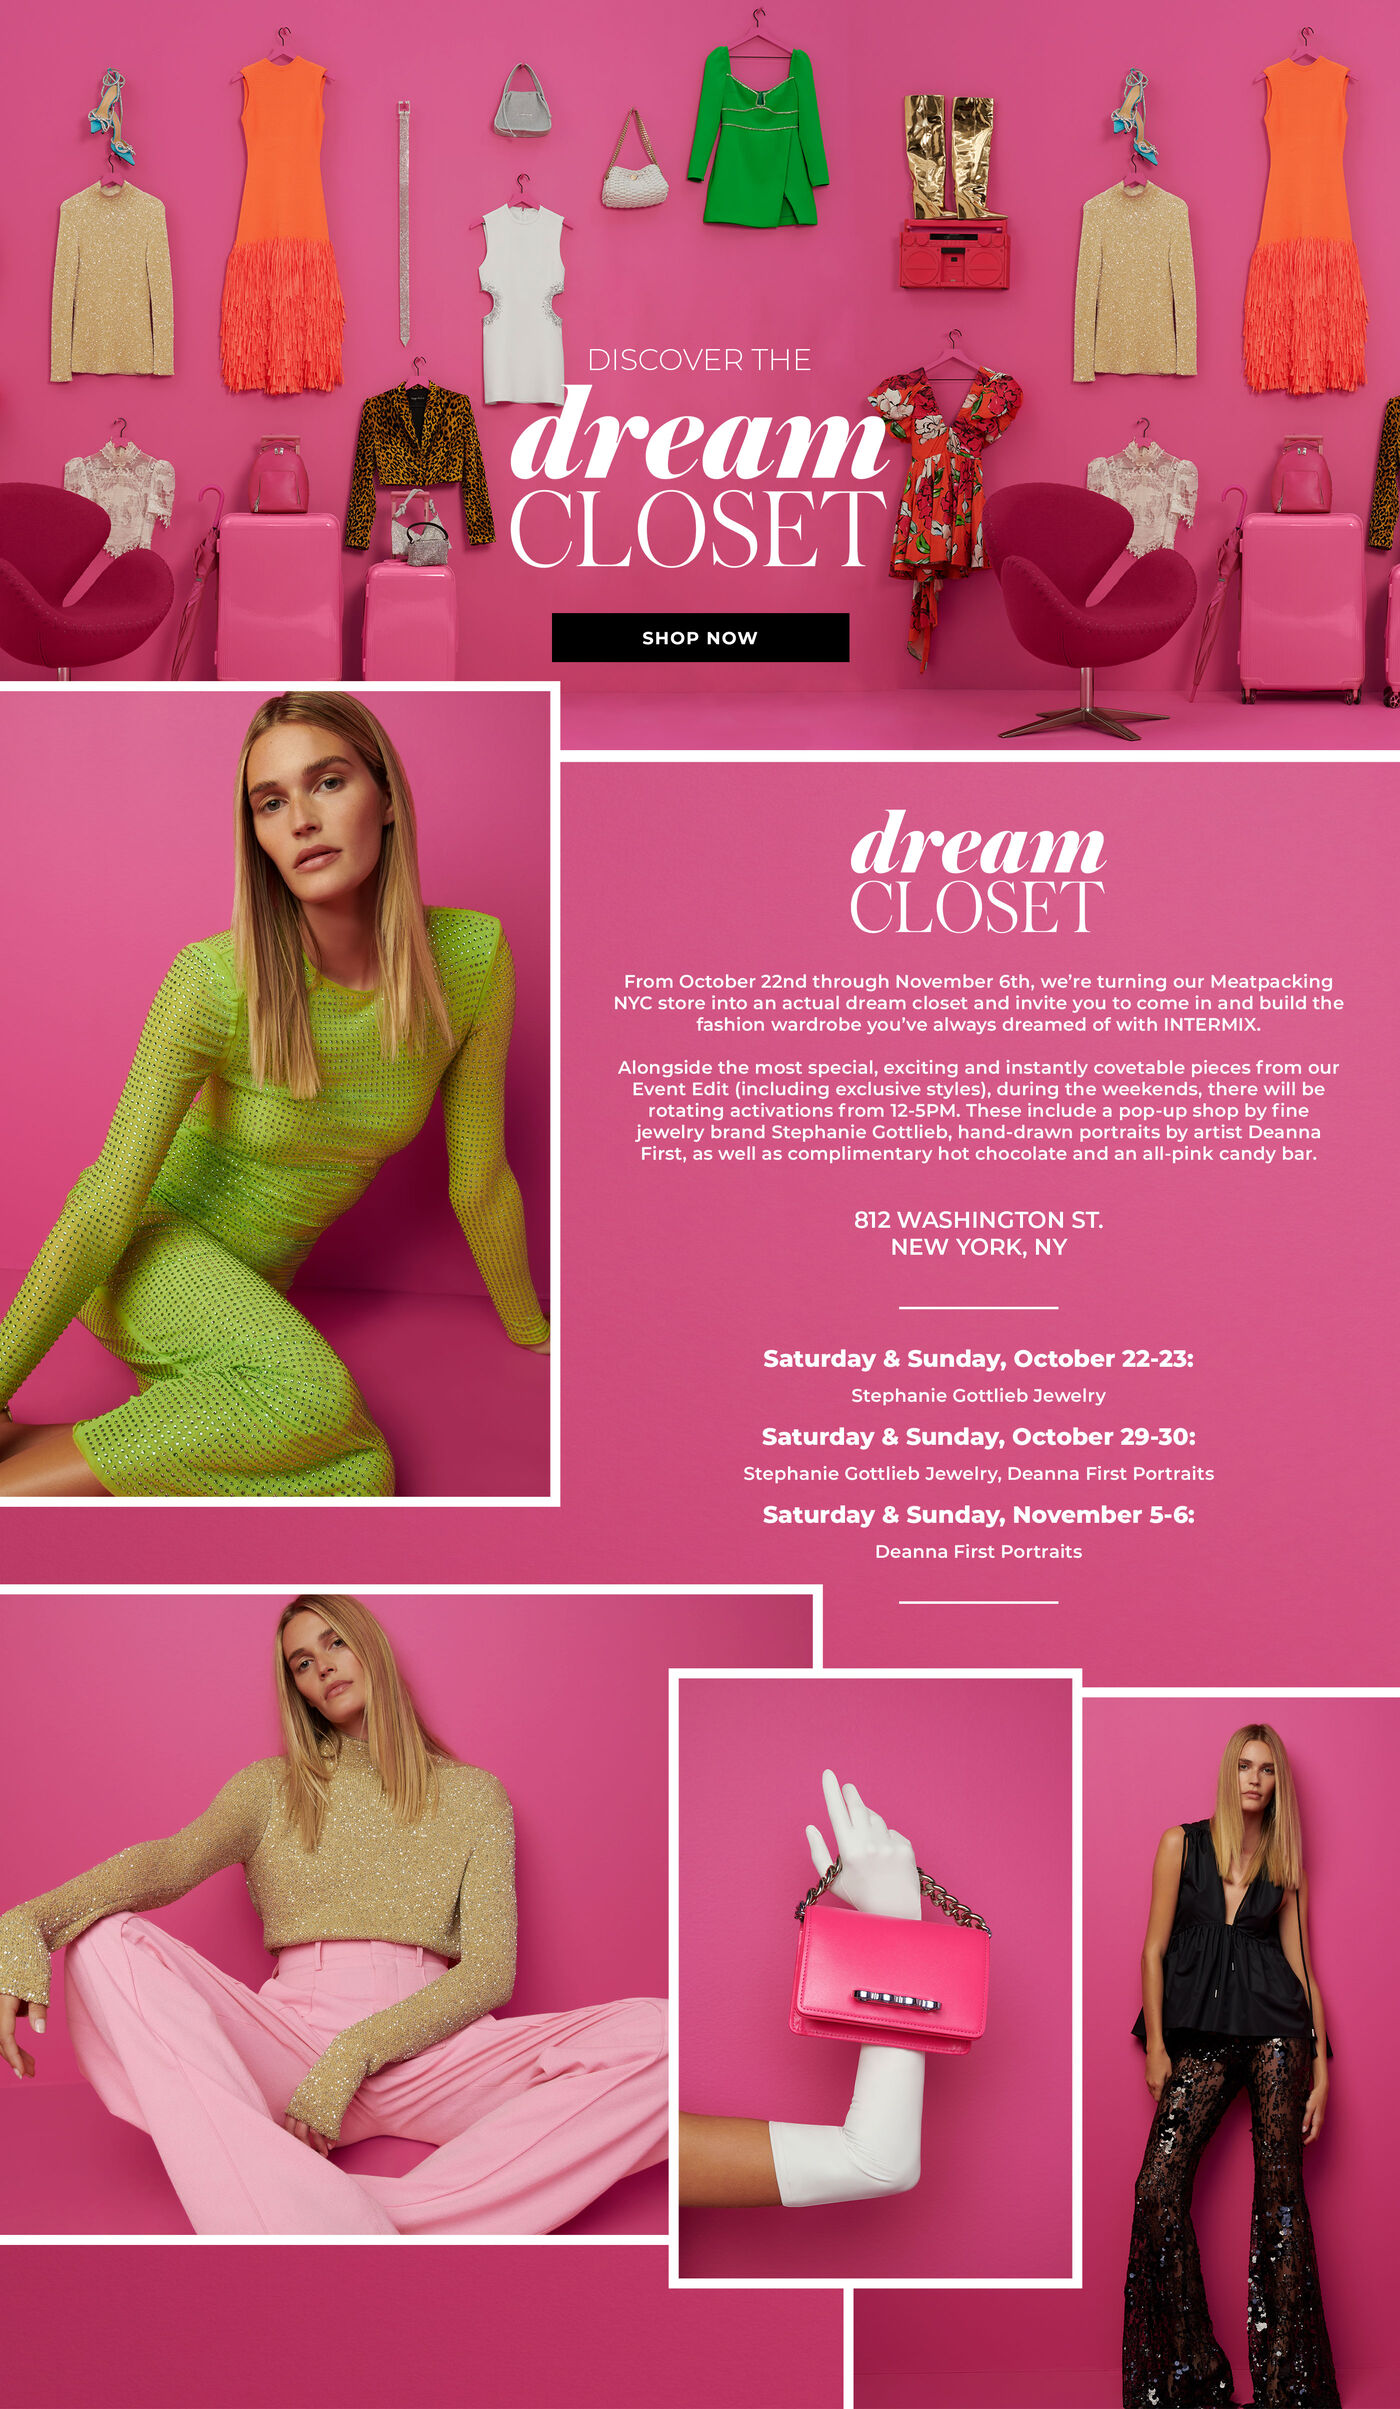 "DREAM CLOSET From October 22nd through November 6th, we’re turning our Meatpacking NYC store into an actual dream closet and invite you to come in and build the fashion wardrobe you’ve always dreamed of with INTERMIX.   Alongside the most special, exciting and instantly covetable pieces from our Event Edit (including exclusive styles), during the weekends, there will be rotating activations from 12-5PM. These include a pop-up shop by fine jewelry brand Stephanie Gottlieb, hand-drawn portraits by artist Deanna First, as well as complimentary hot chocolate and an all-pink candy bar.   812 WASHINGTON ST NEW YORK, NY  Saturday & Sunday, October 22-23: Stephanie Gottlieb Jewelry Saturday & Sunday, October 29-30: Stephanie Gottlieb Jewelry, Deanna First Portraits Saturday & Sunday, November 5-6: Deanna First Portraits  "